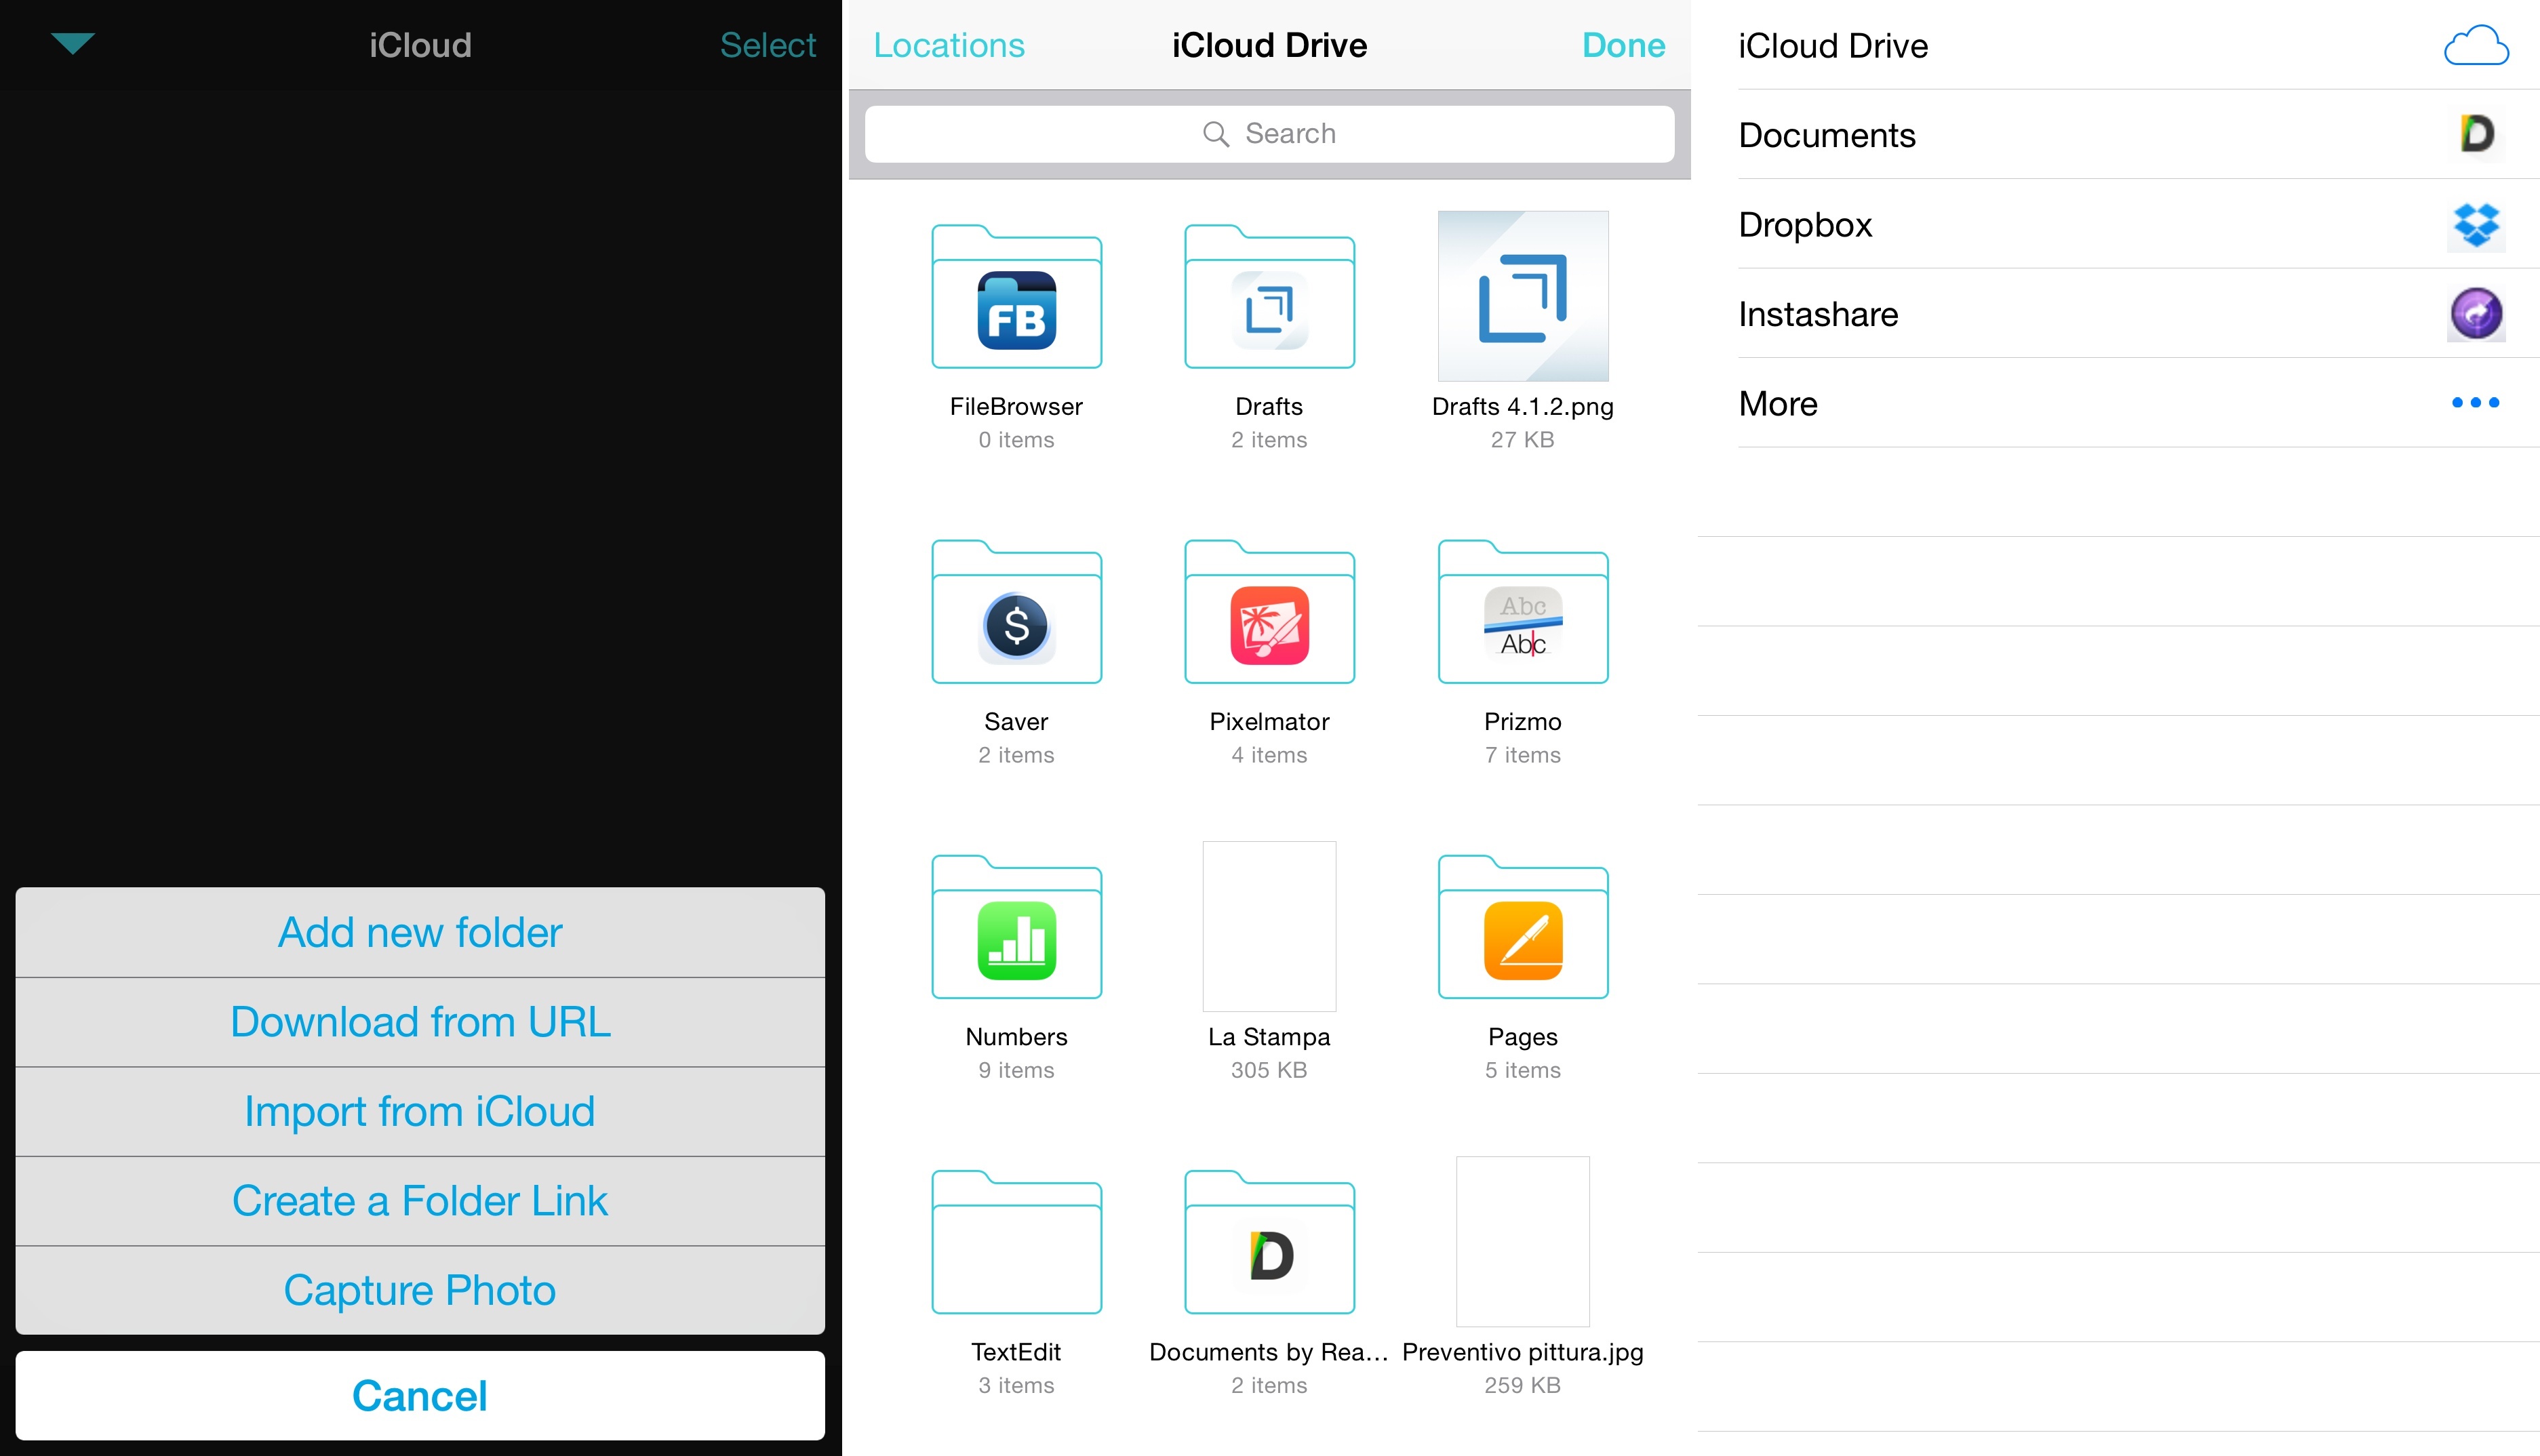 I use FileBrowser to access iCloud Drive and other apps that provide document storage.